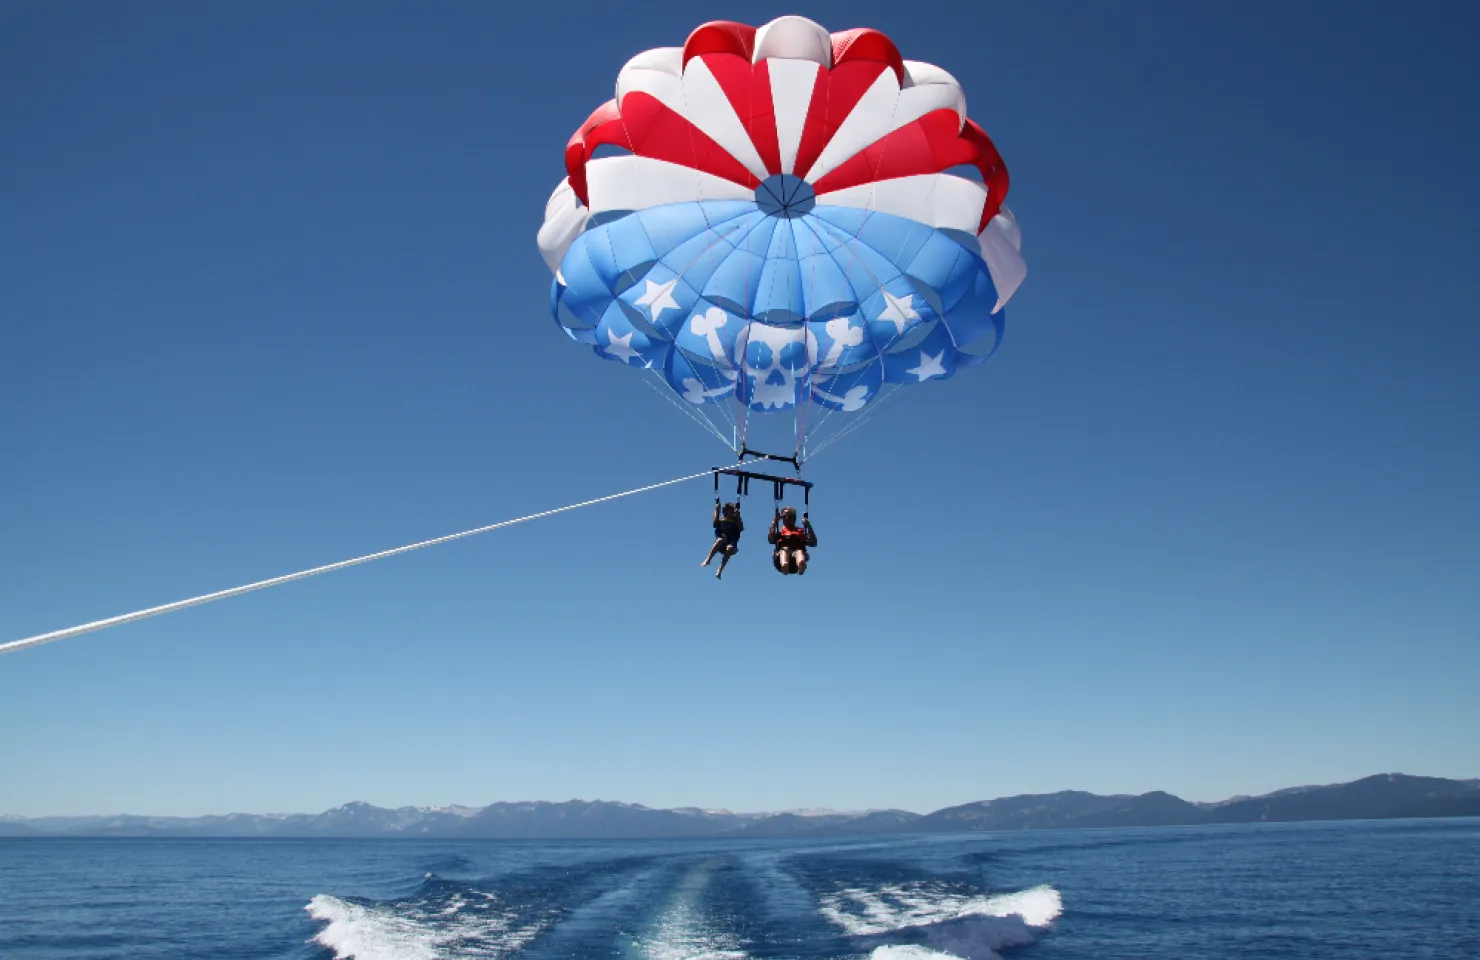 Parasailing In the Algarve - Algarve Boat Trips and Tours - 